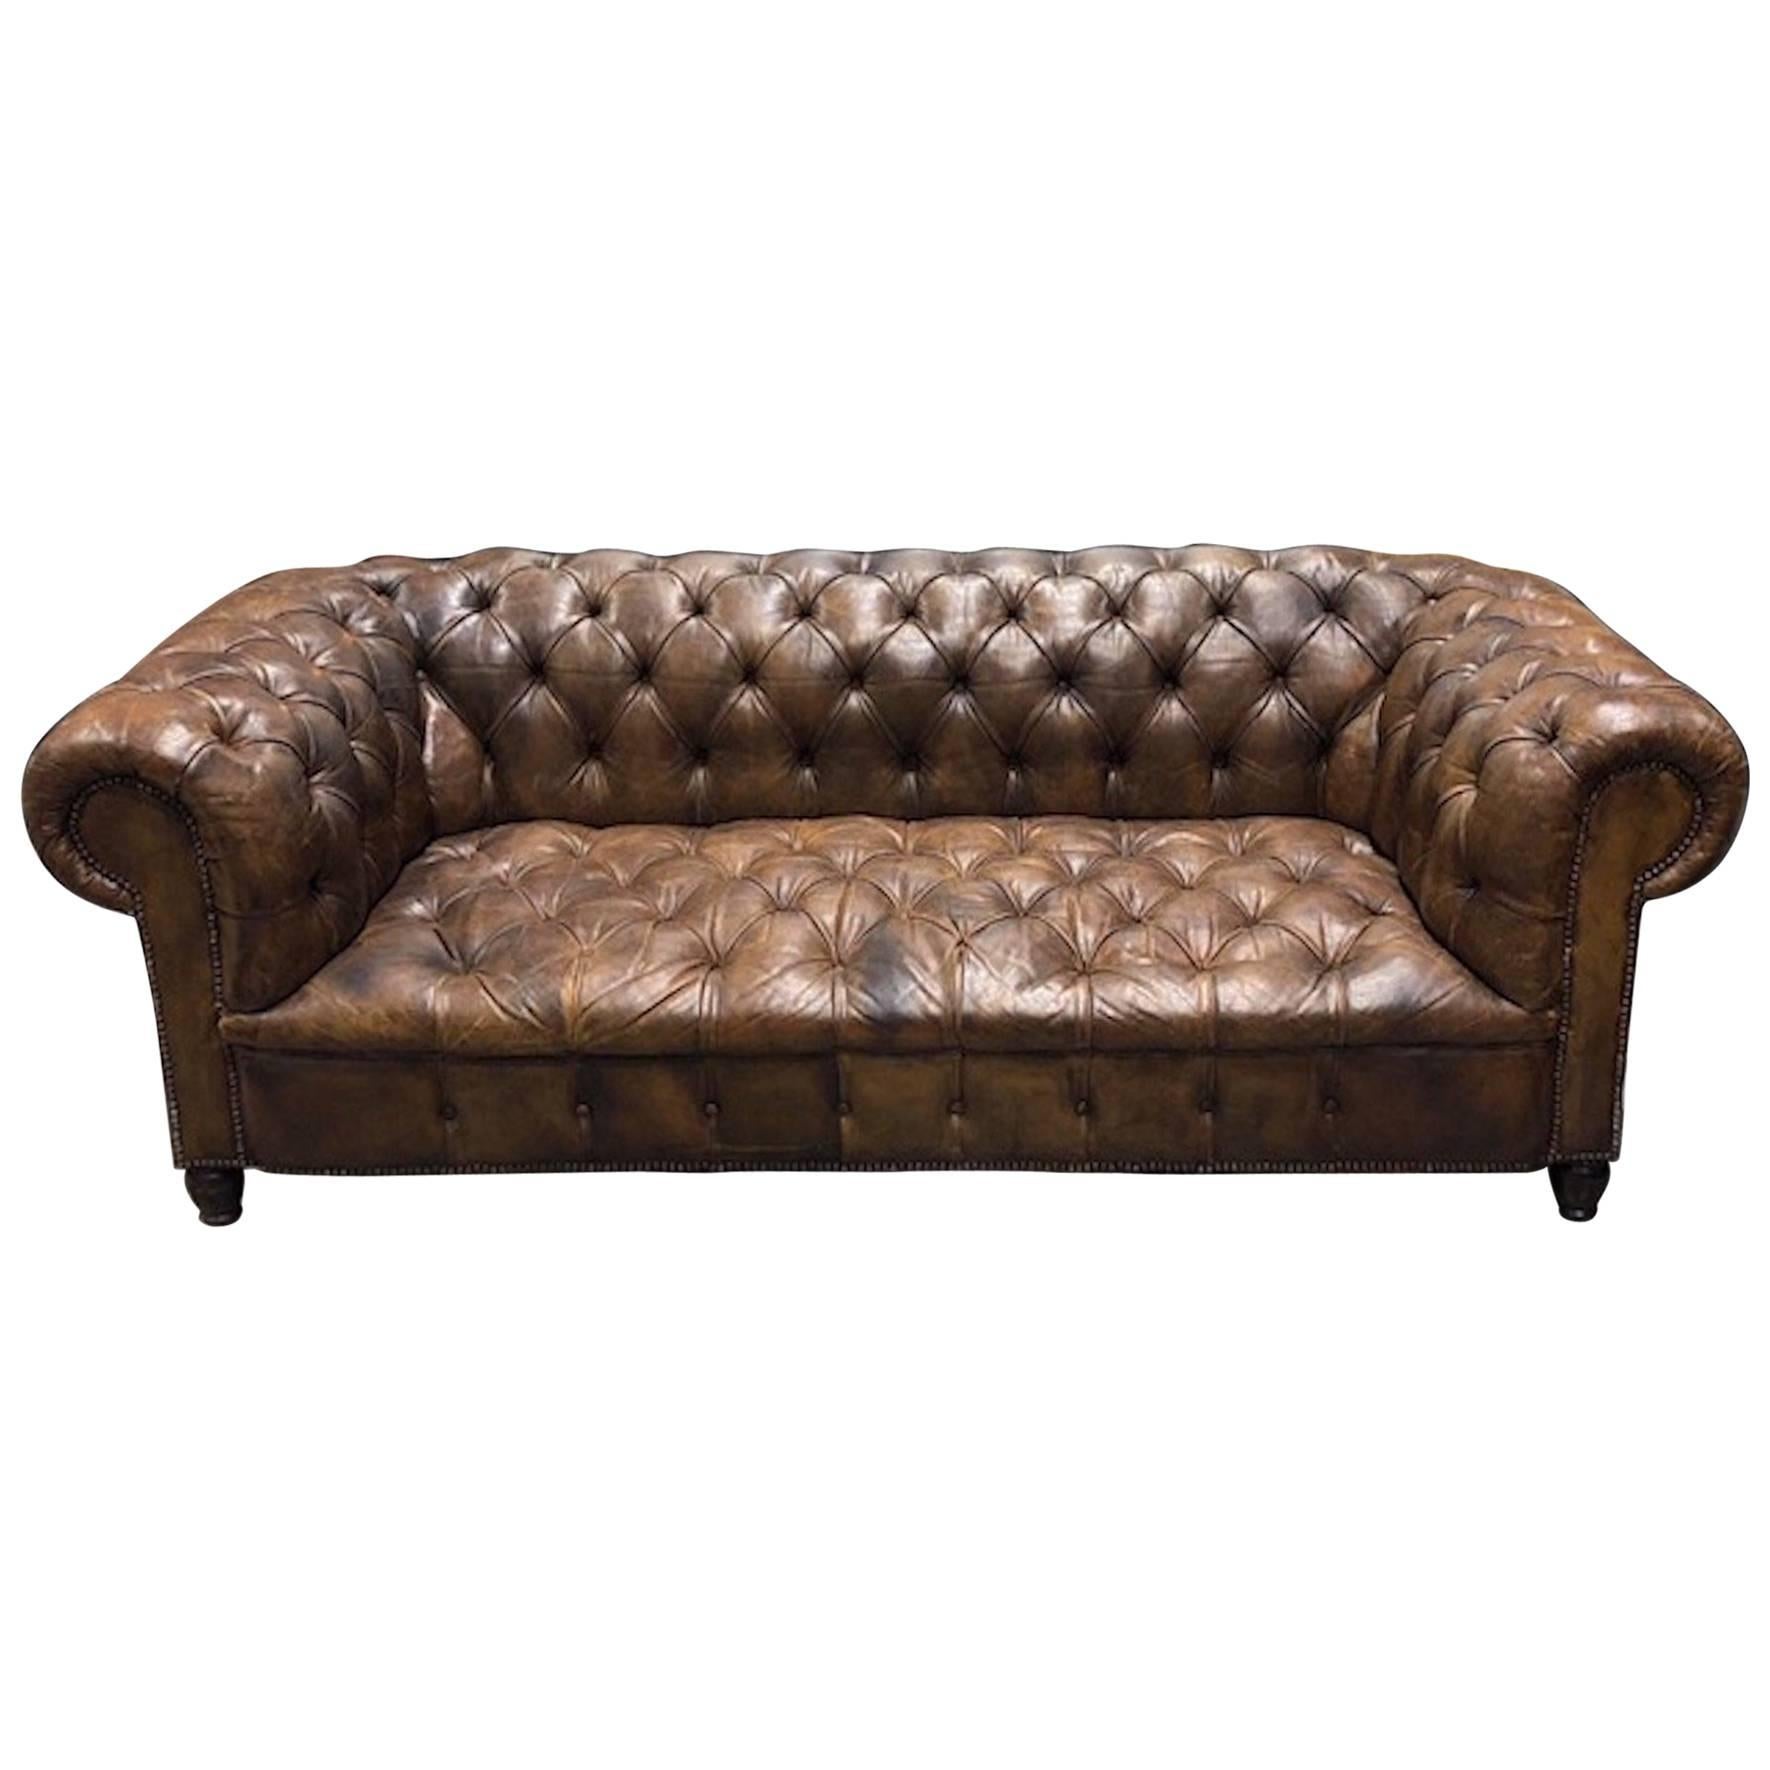 English Leather Chesterfield Rolled Arm Sofa